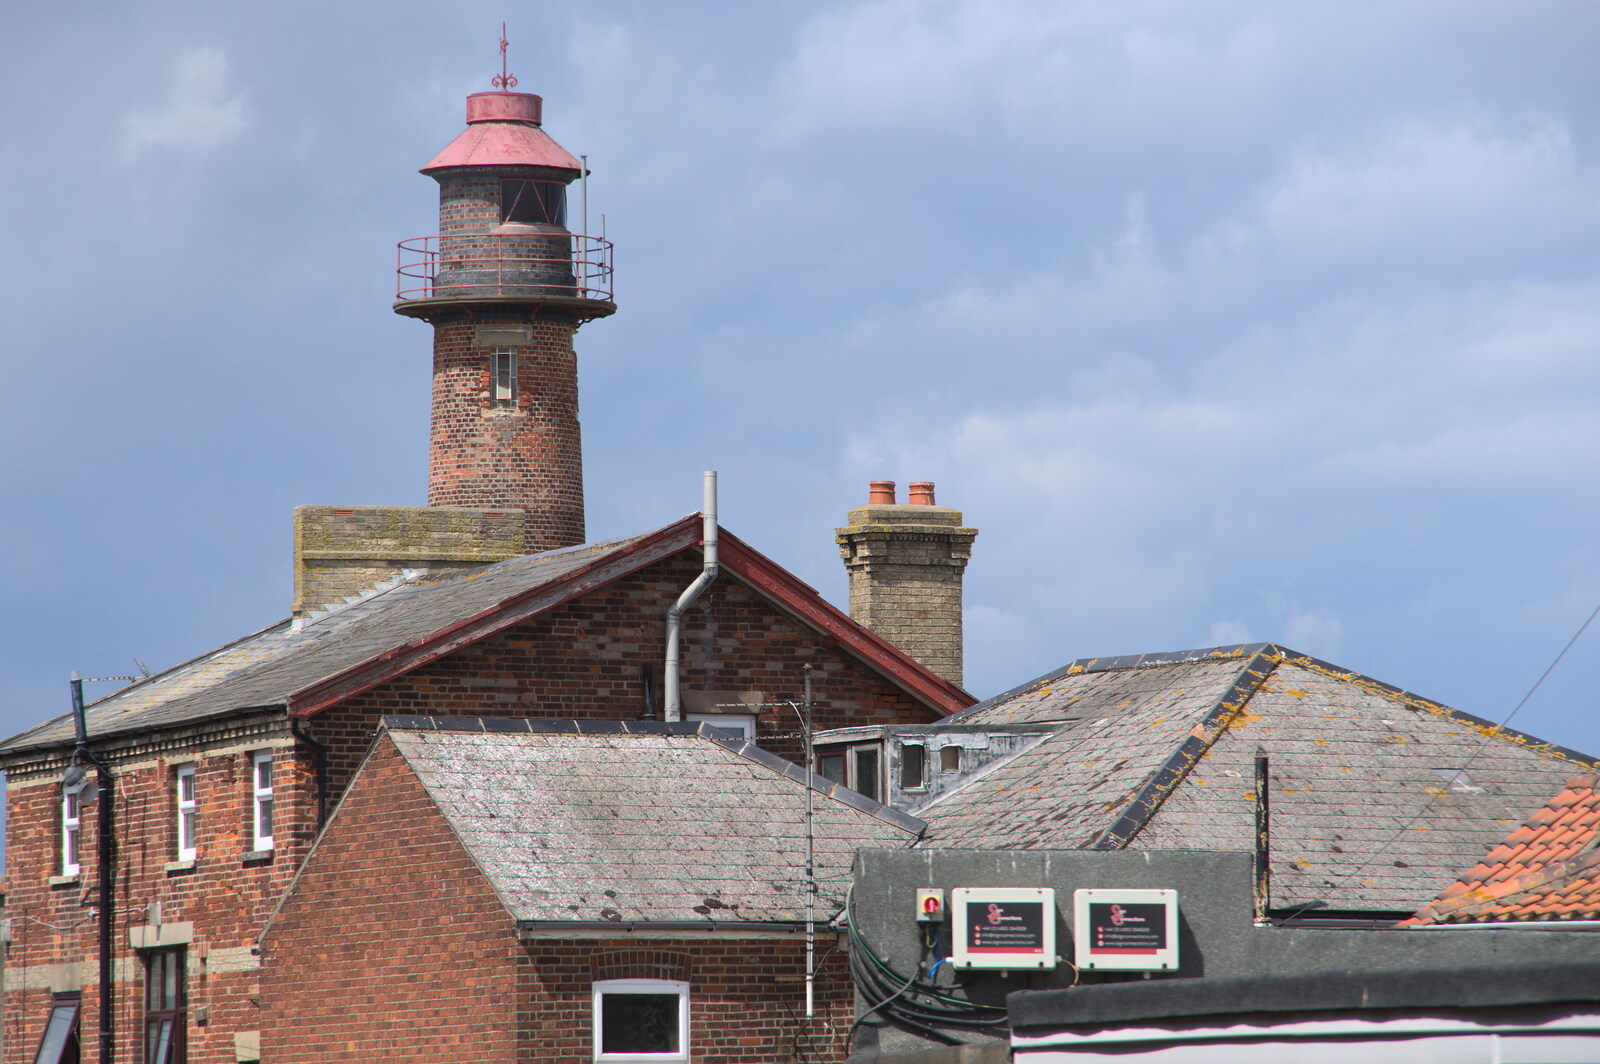 The curious Gorleston lighthouse from Faded Seaside Glamour: A Weekend in Great Yarmouth, Norfolk - 29th May 2022